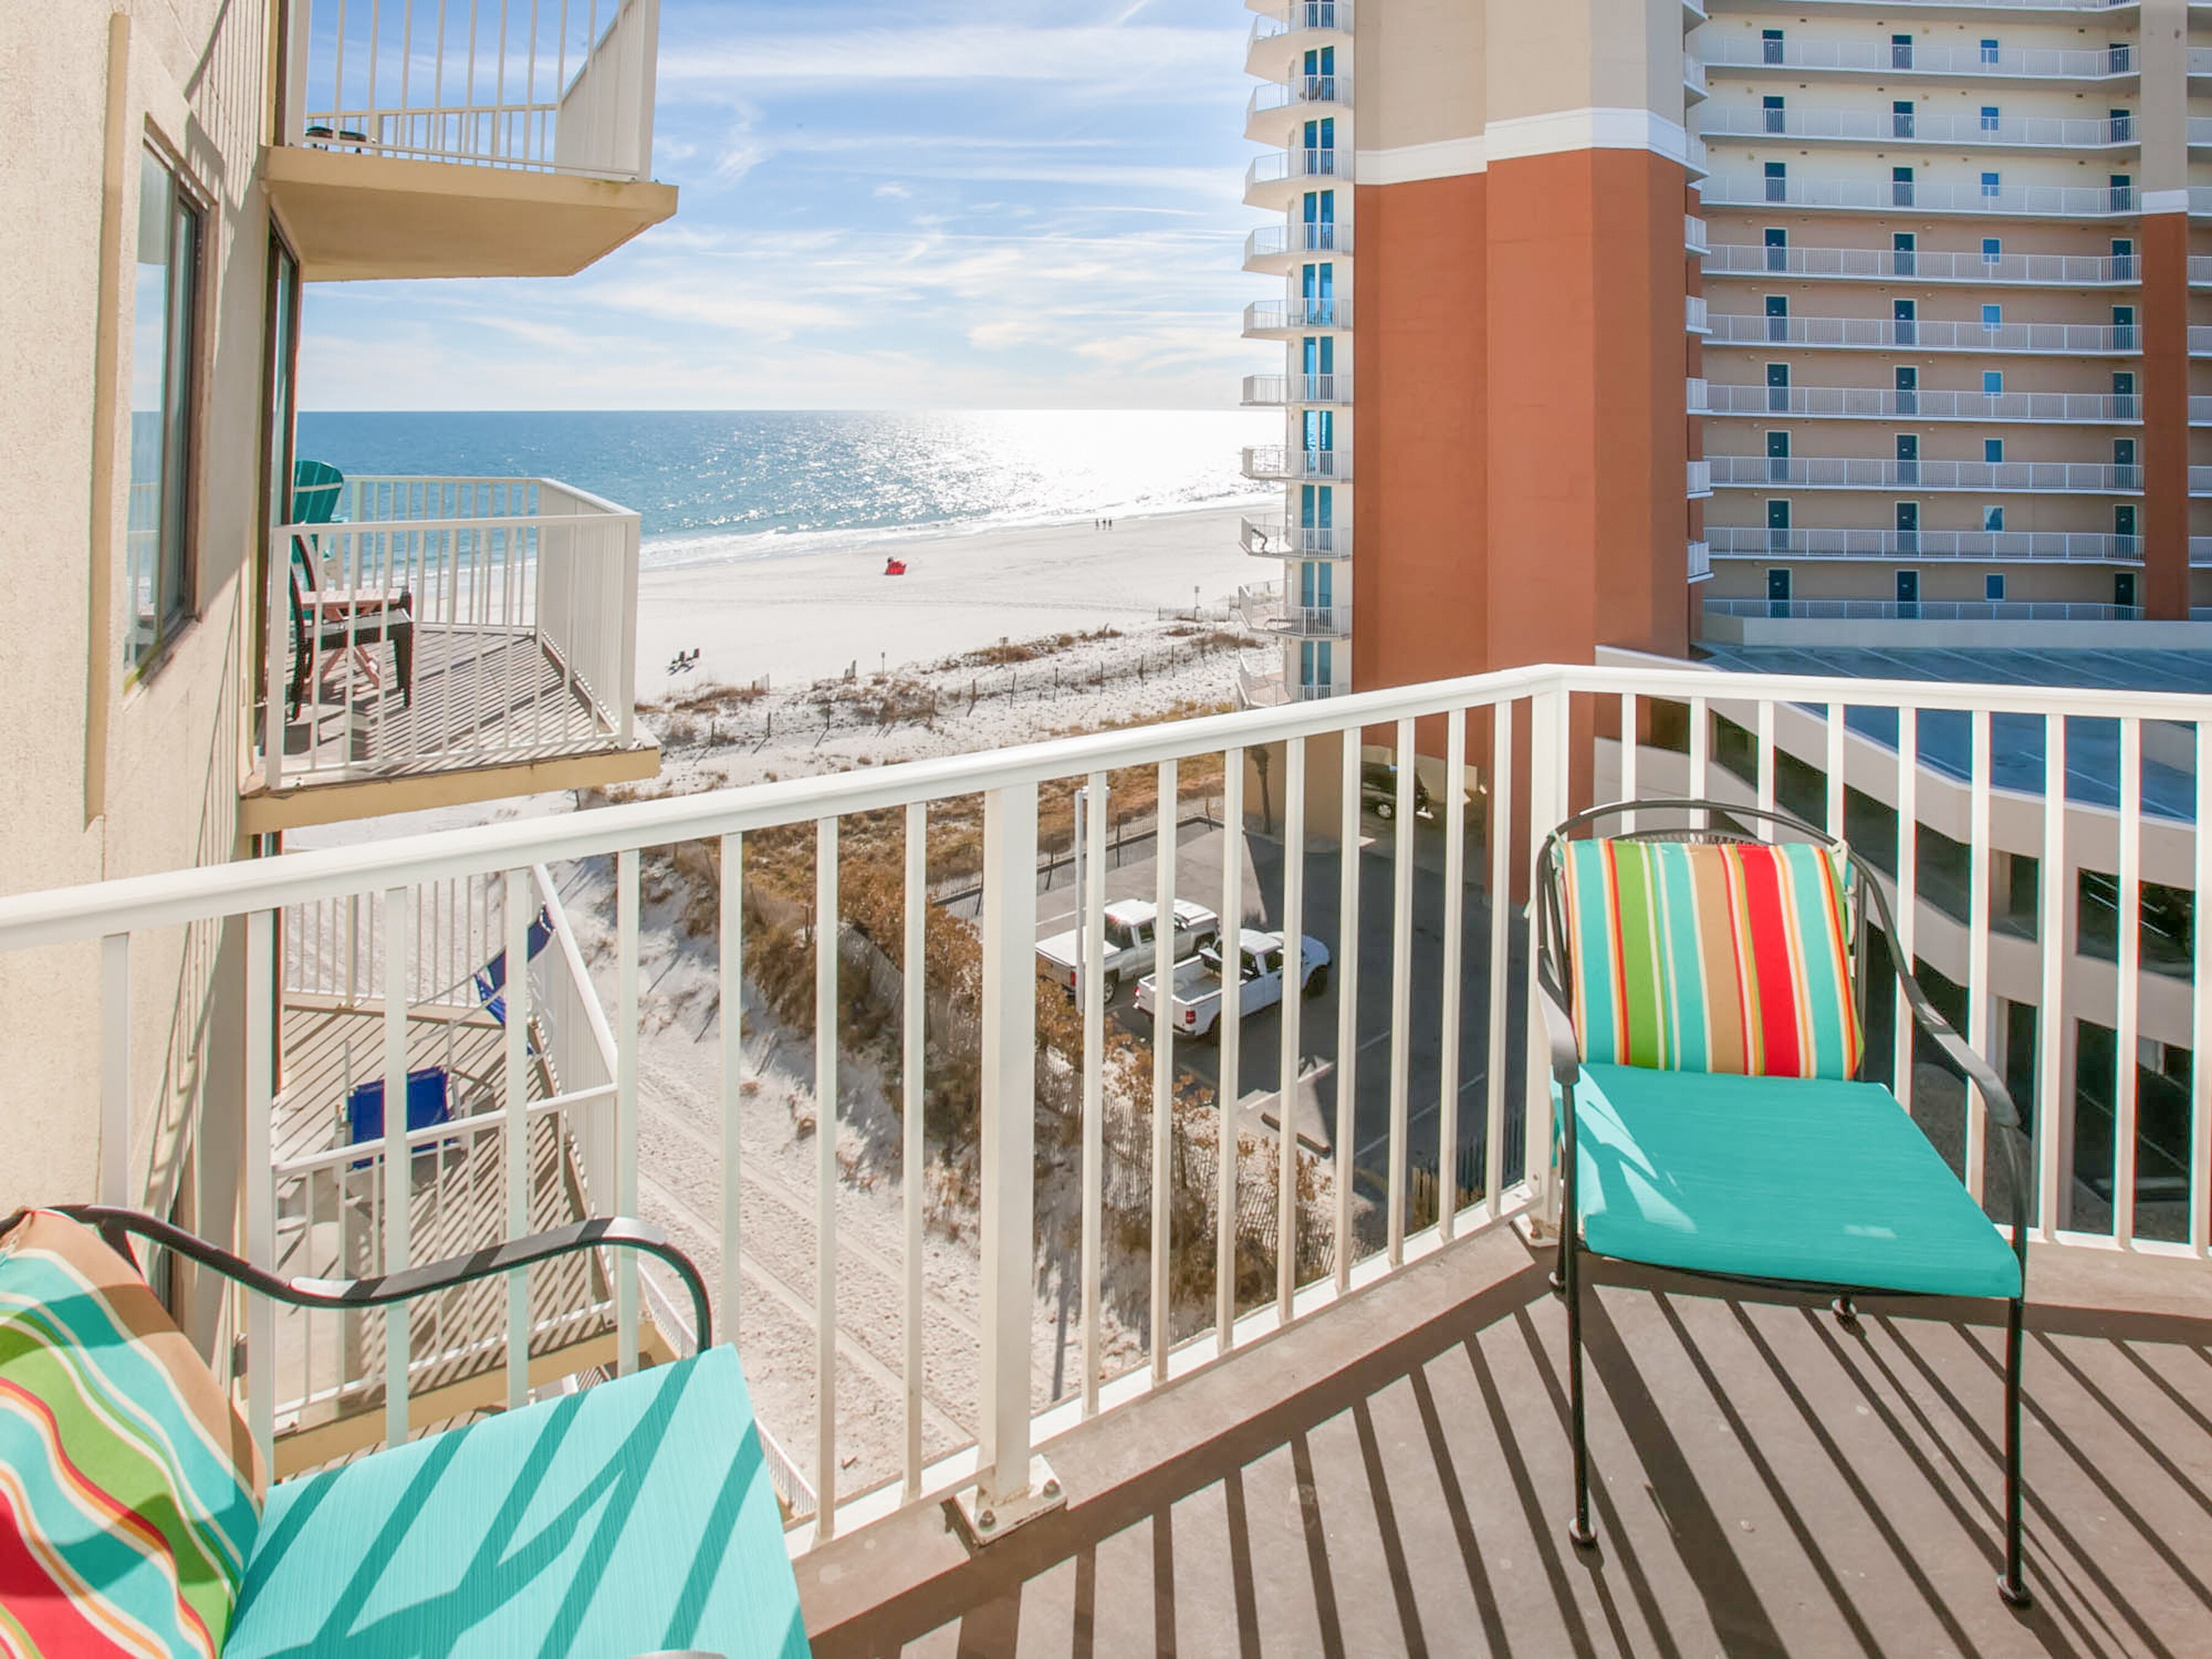 Welcome to Gulf Shores! Beautiful beach and gulf views await from your private balcony.